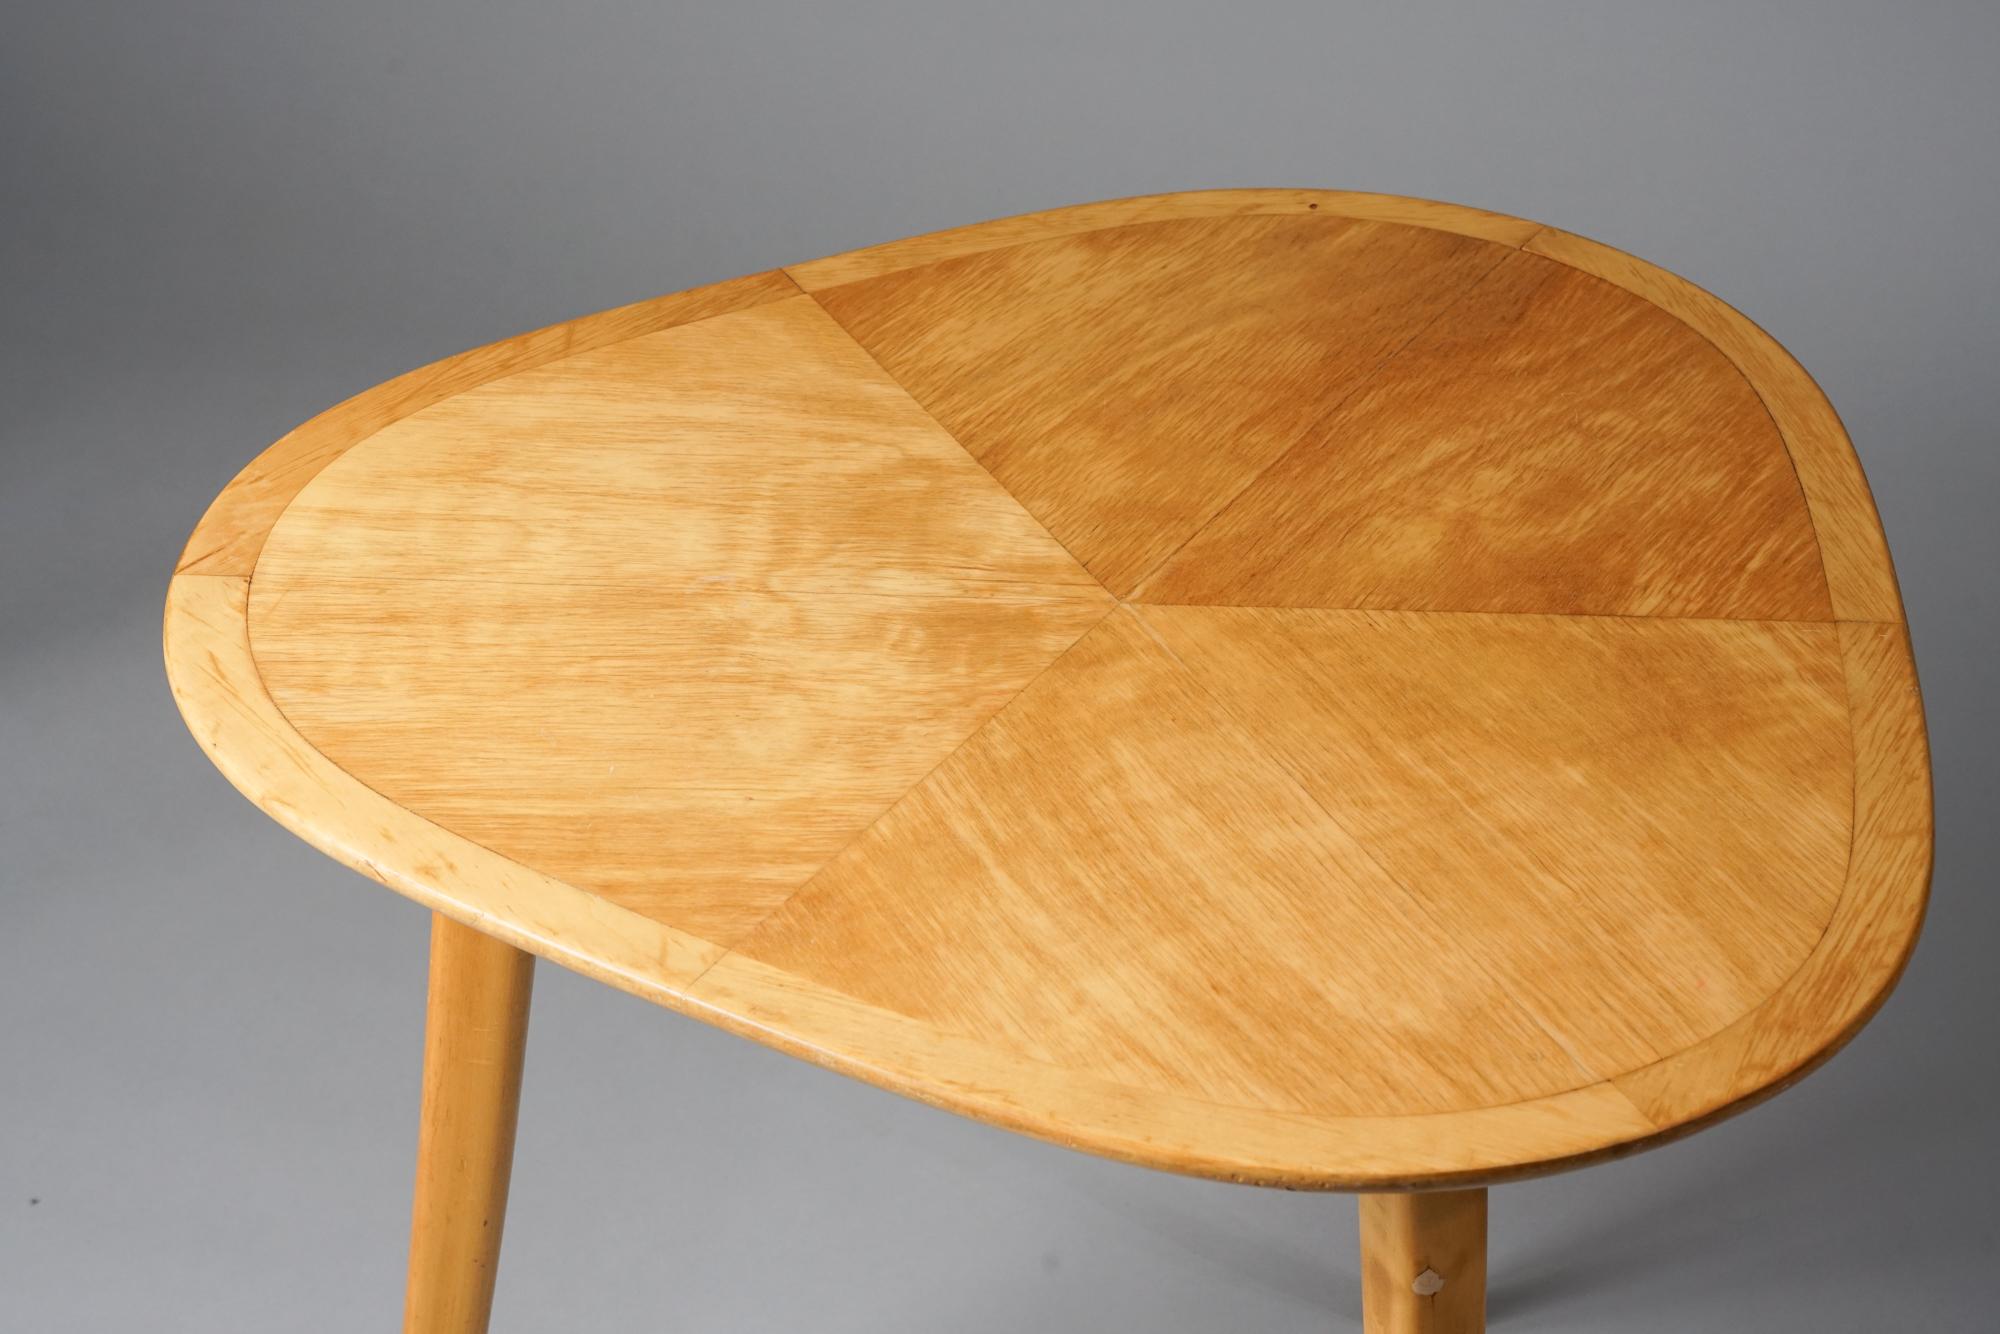 Coffee table atrributed to Gunnel Nyman, 1940s/1950s. Birch. Beautiful birch pattern on the table top. Good vintage condition. 